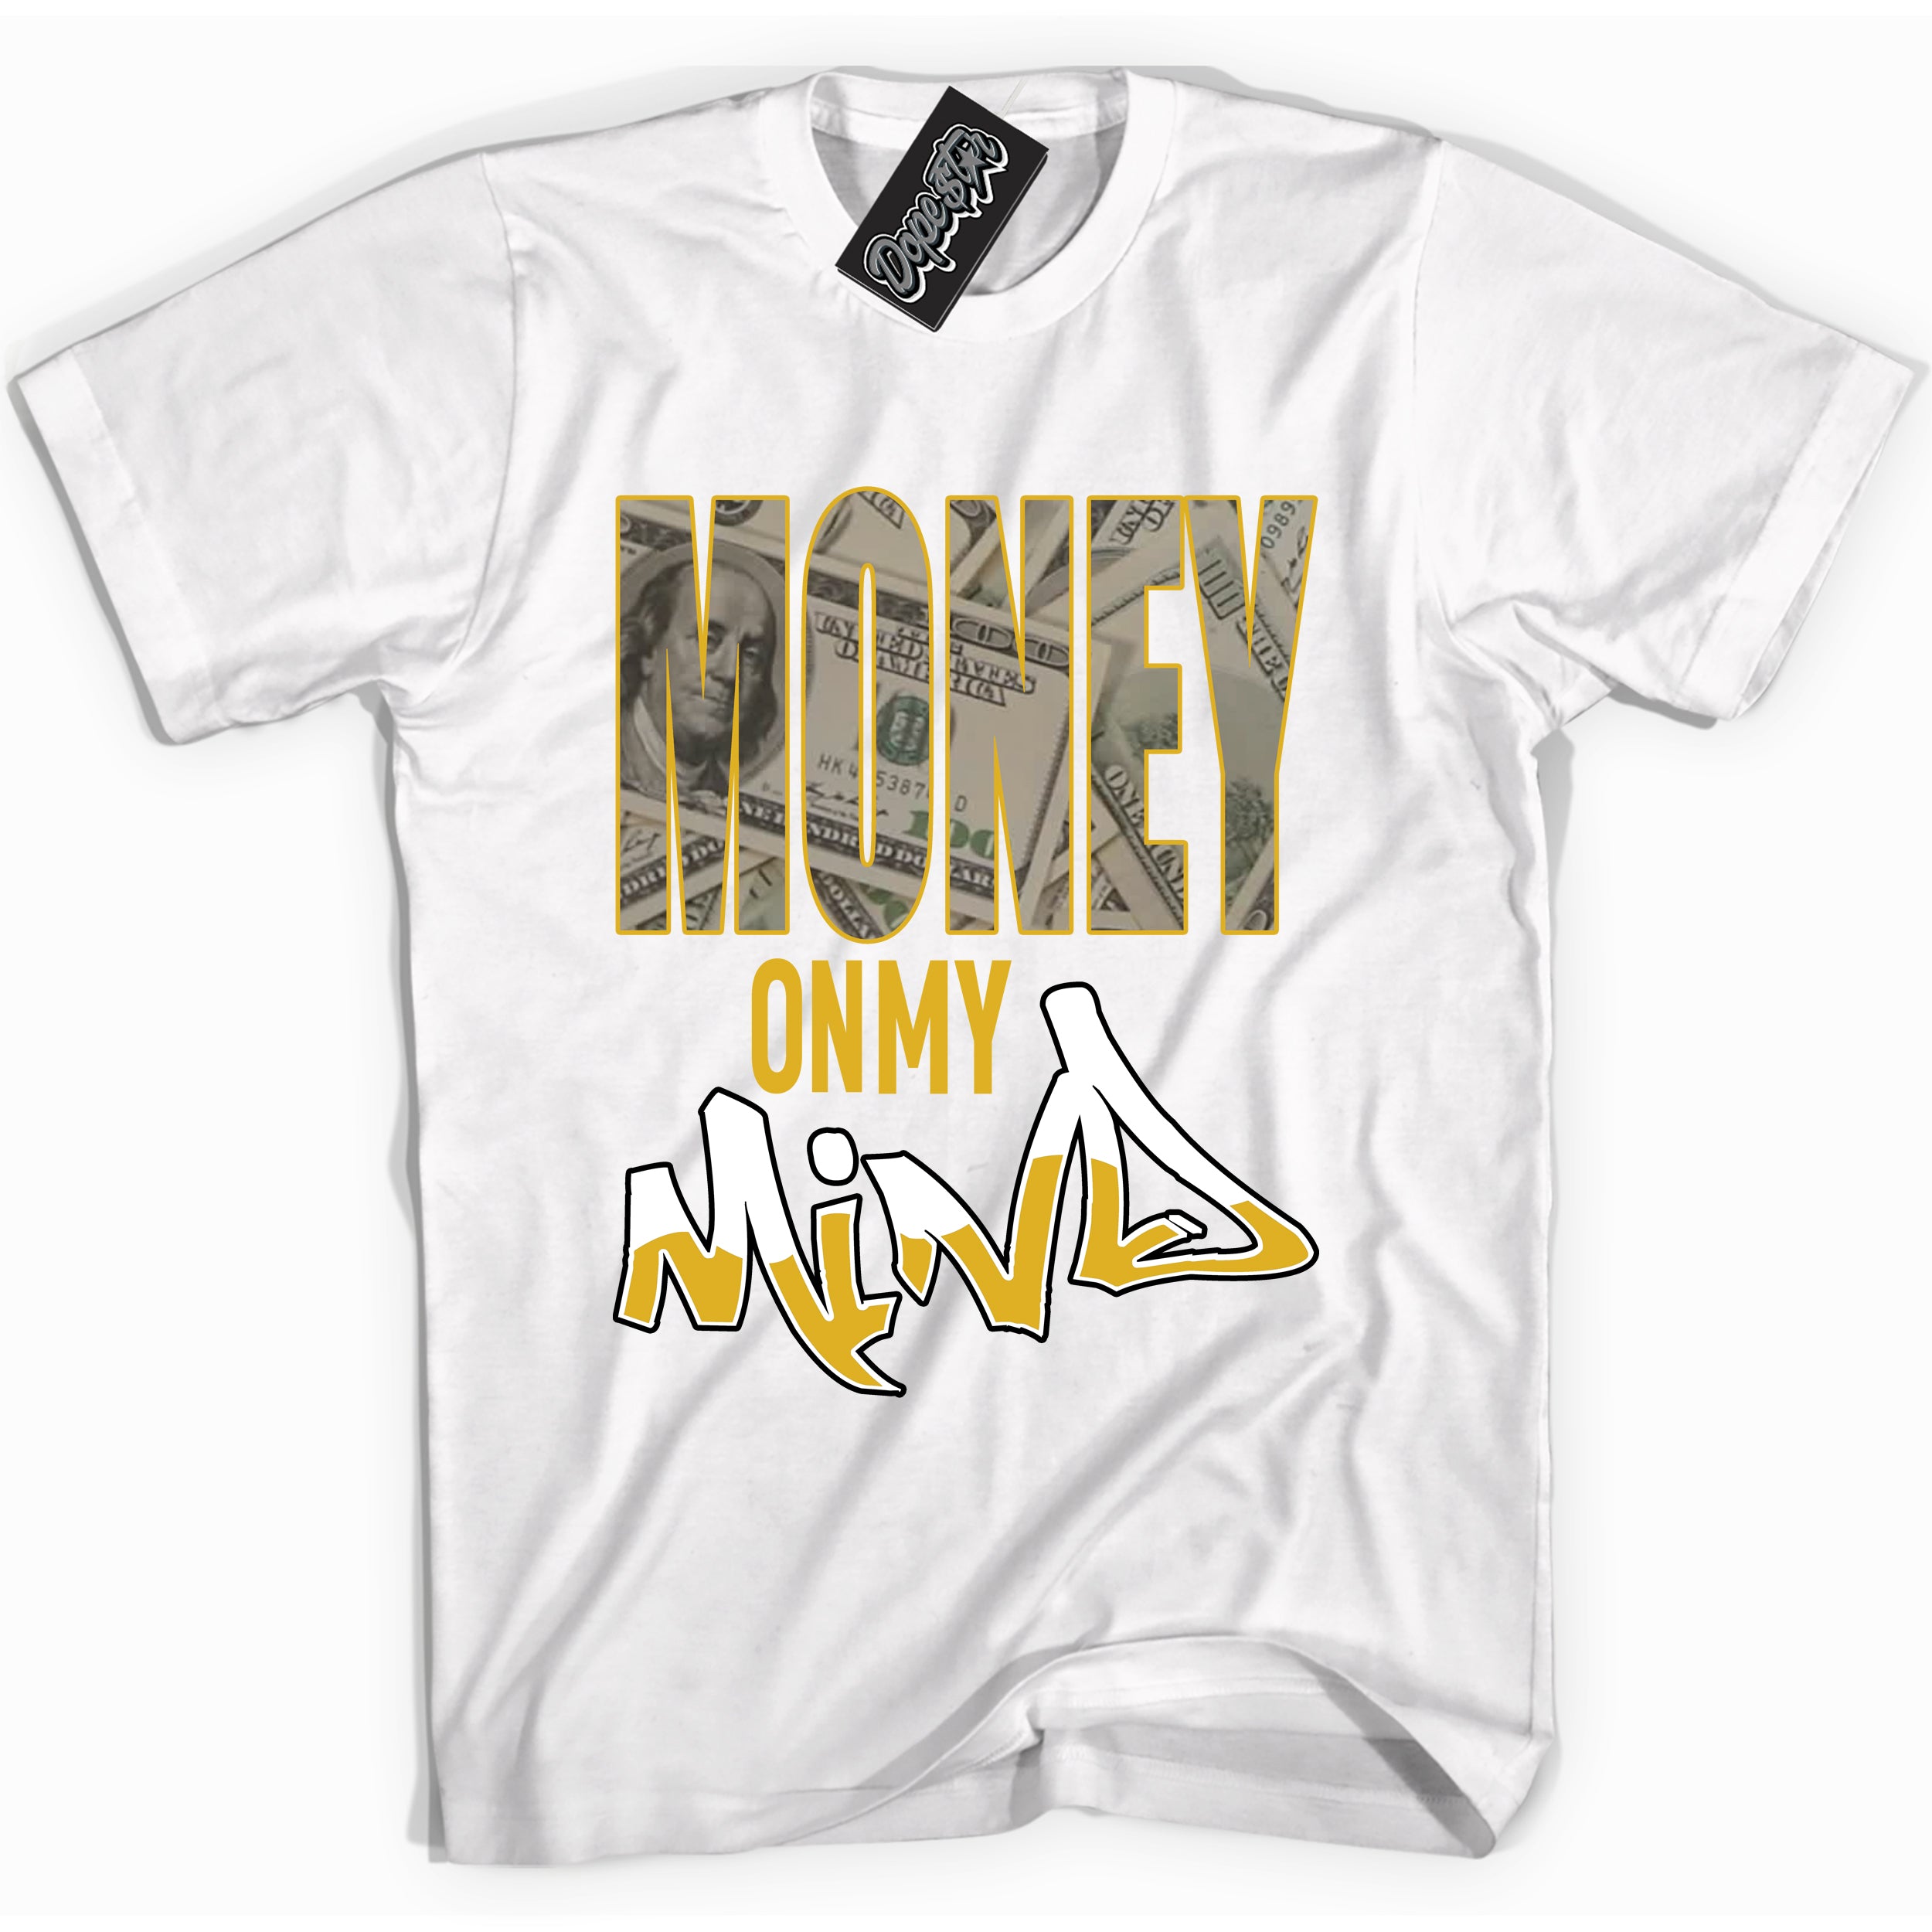 Cool White Shirt with “ Money On My Mind” design that perfectly matches Yellow Ochre 6s Sneakers.